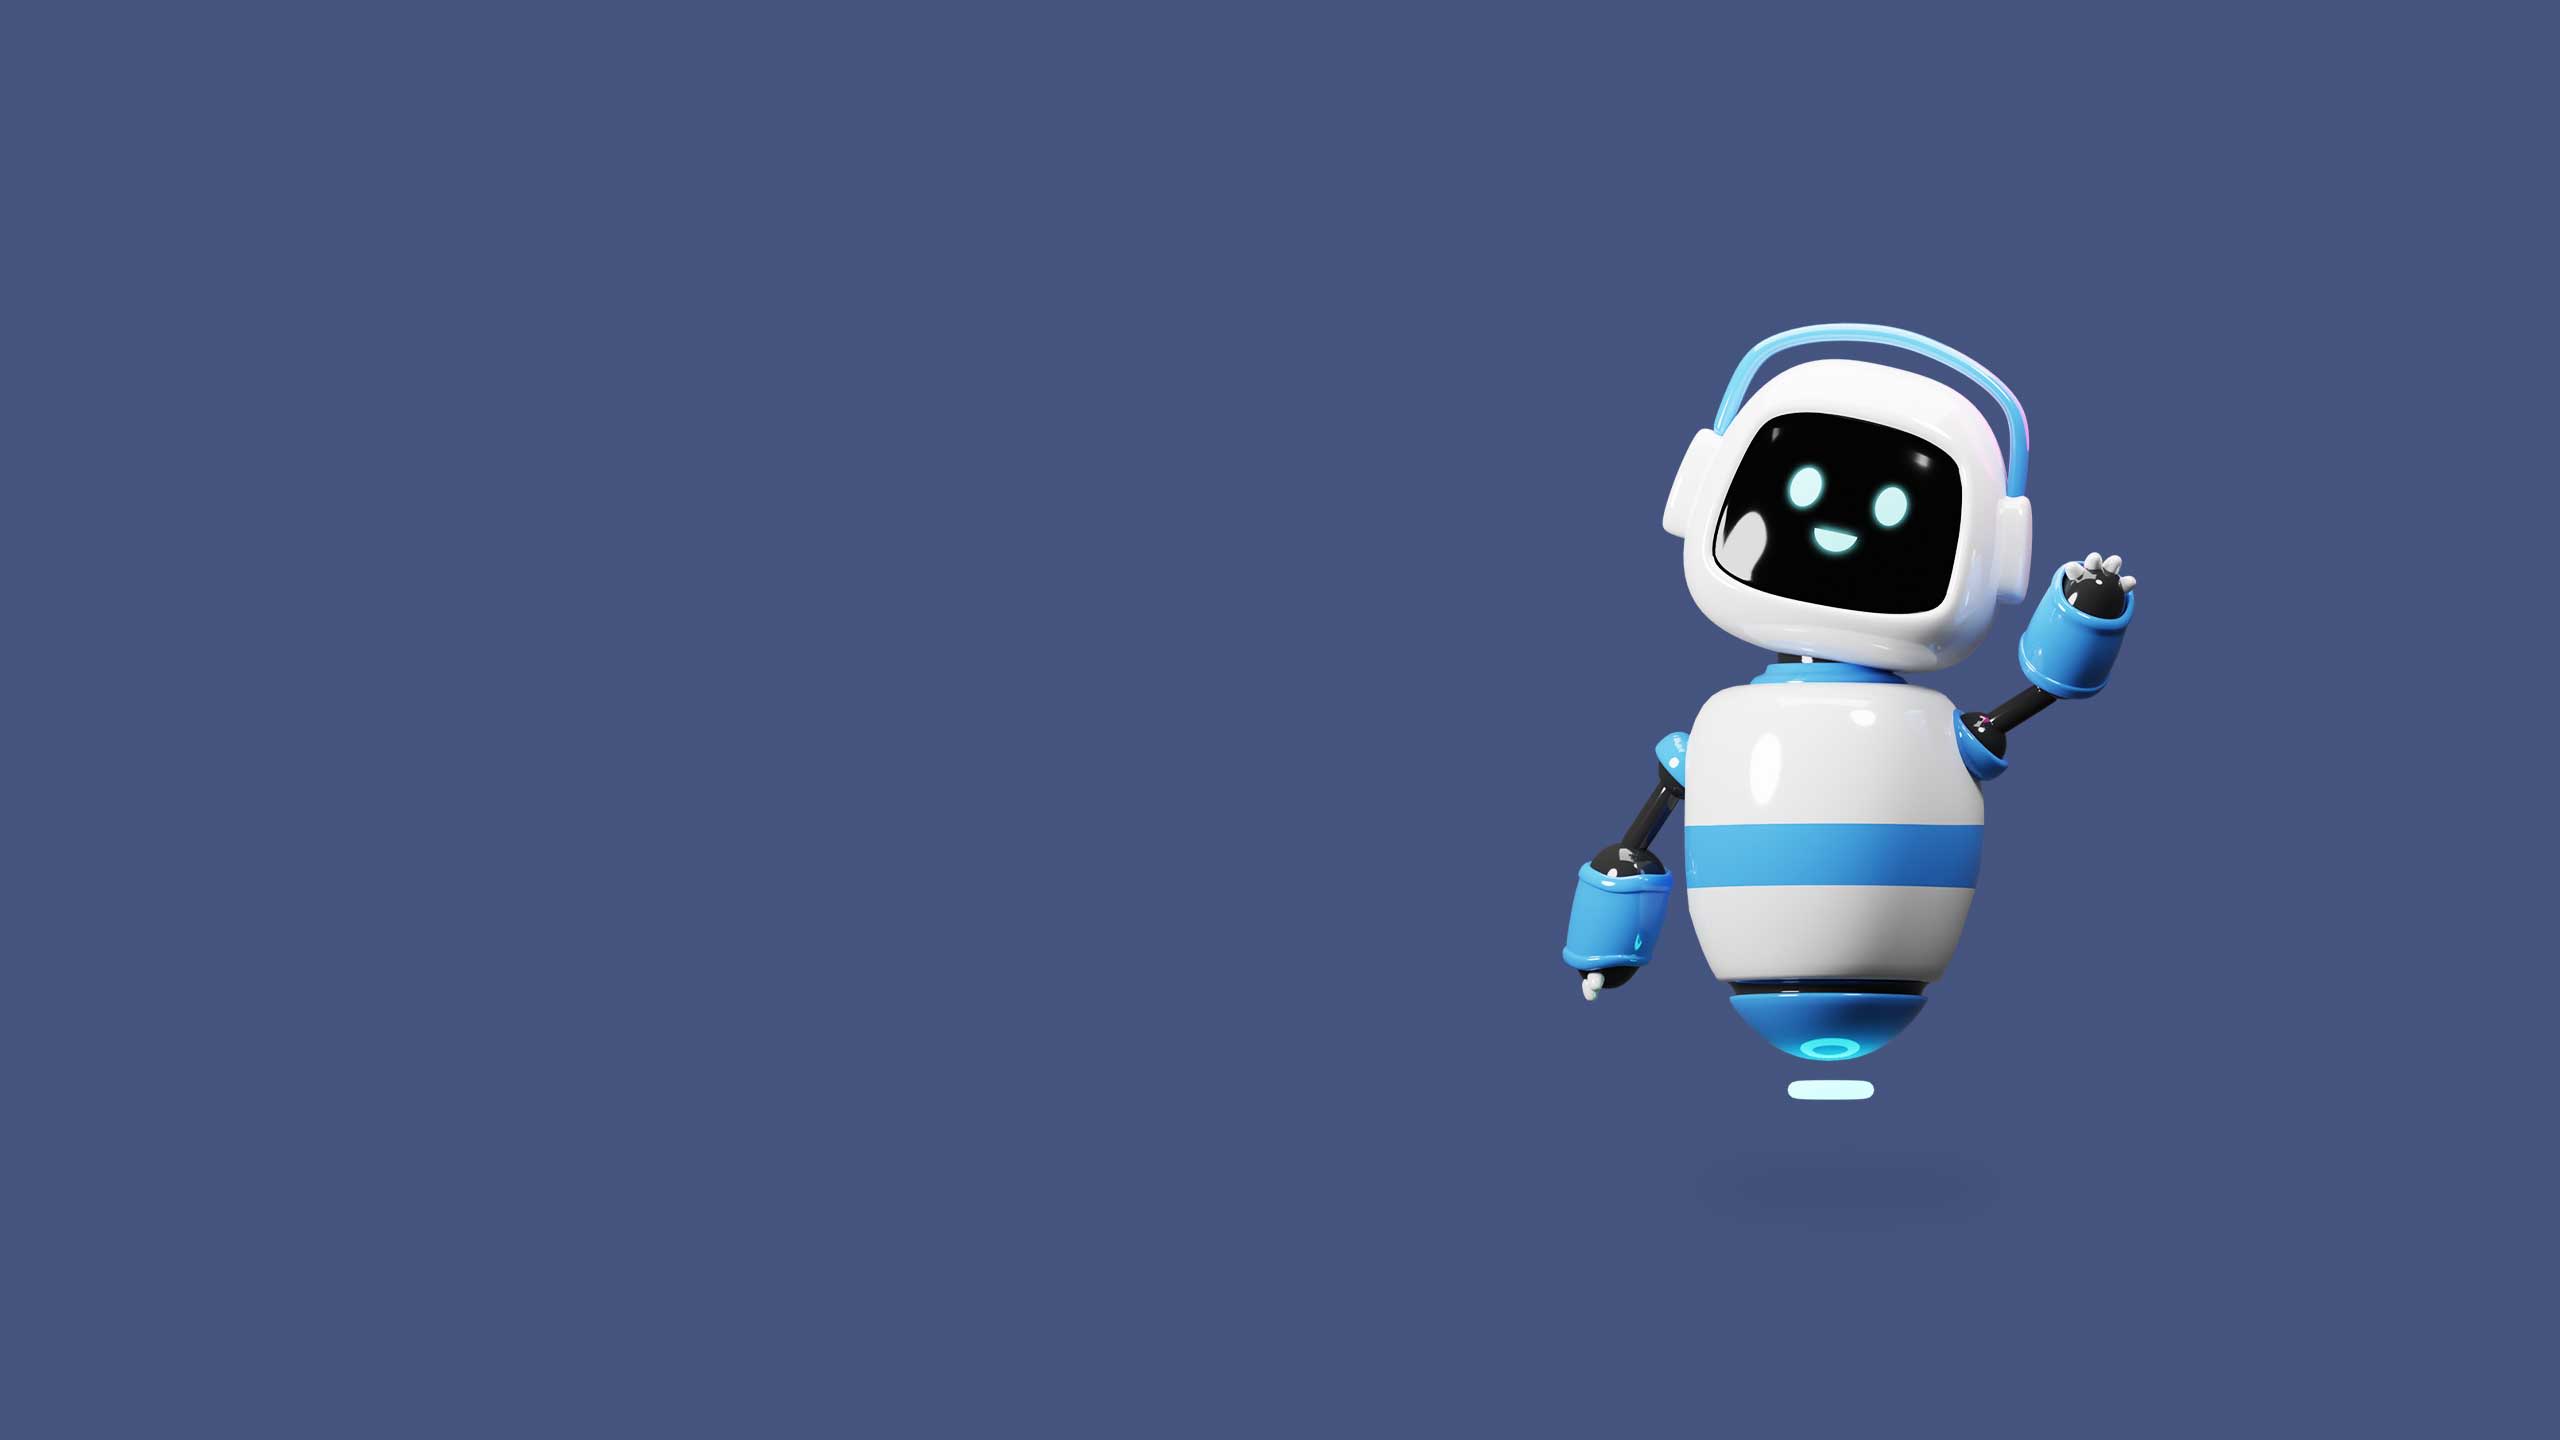 Dark blue background with a small blue-and white robot on the right side, smiling and waving.